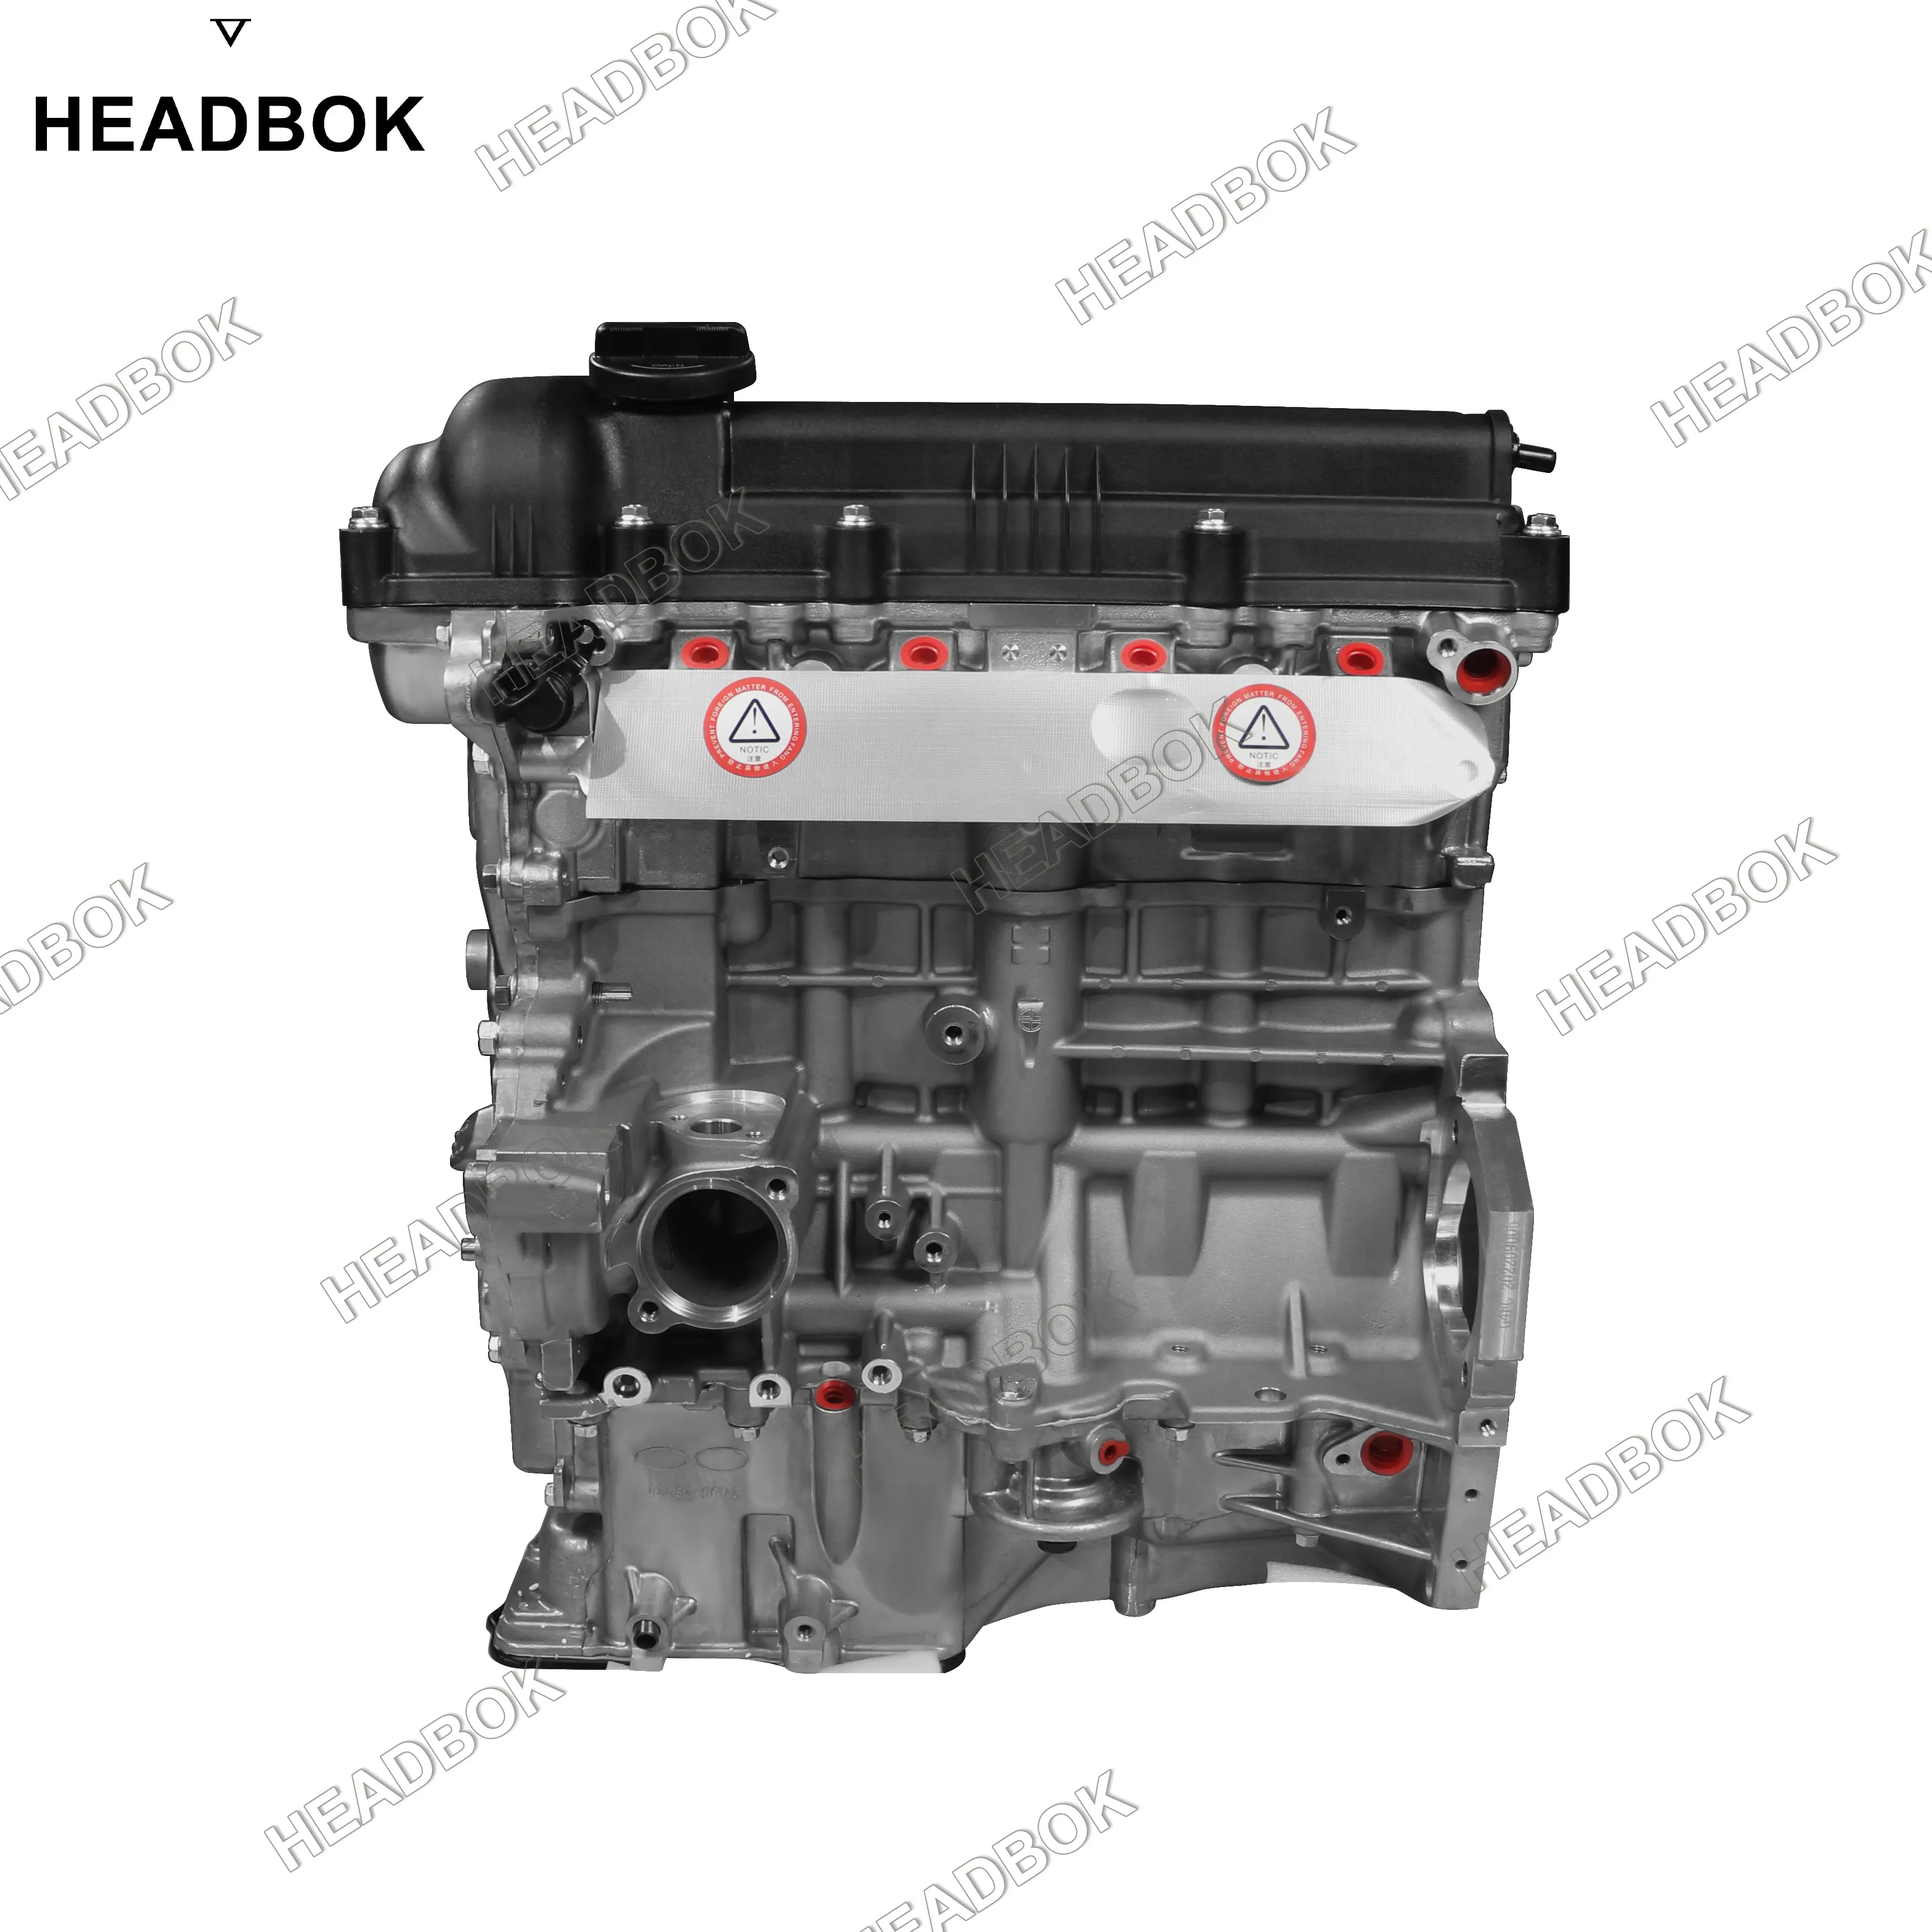 HEADBOK Genuine Quality cylinder blocks Engine system Complete Long Block G4FA G4FC For Hyundai auto parts Engine block Assembly